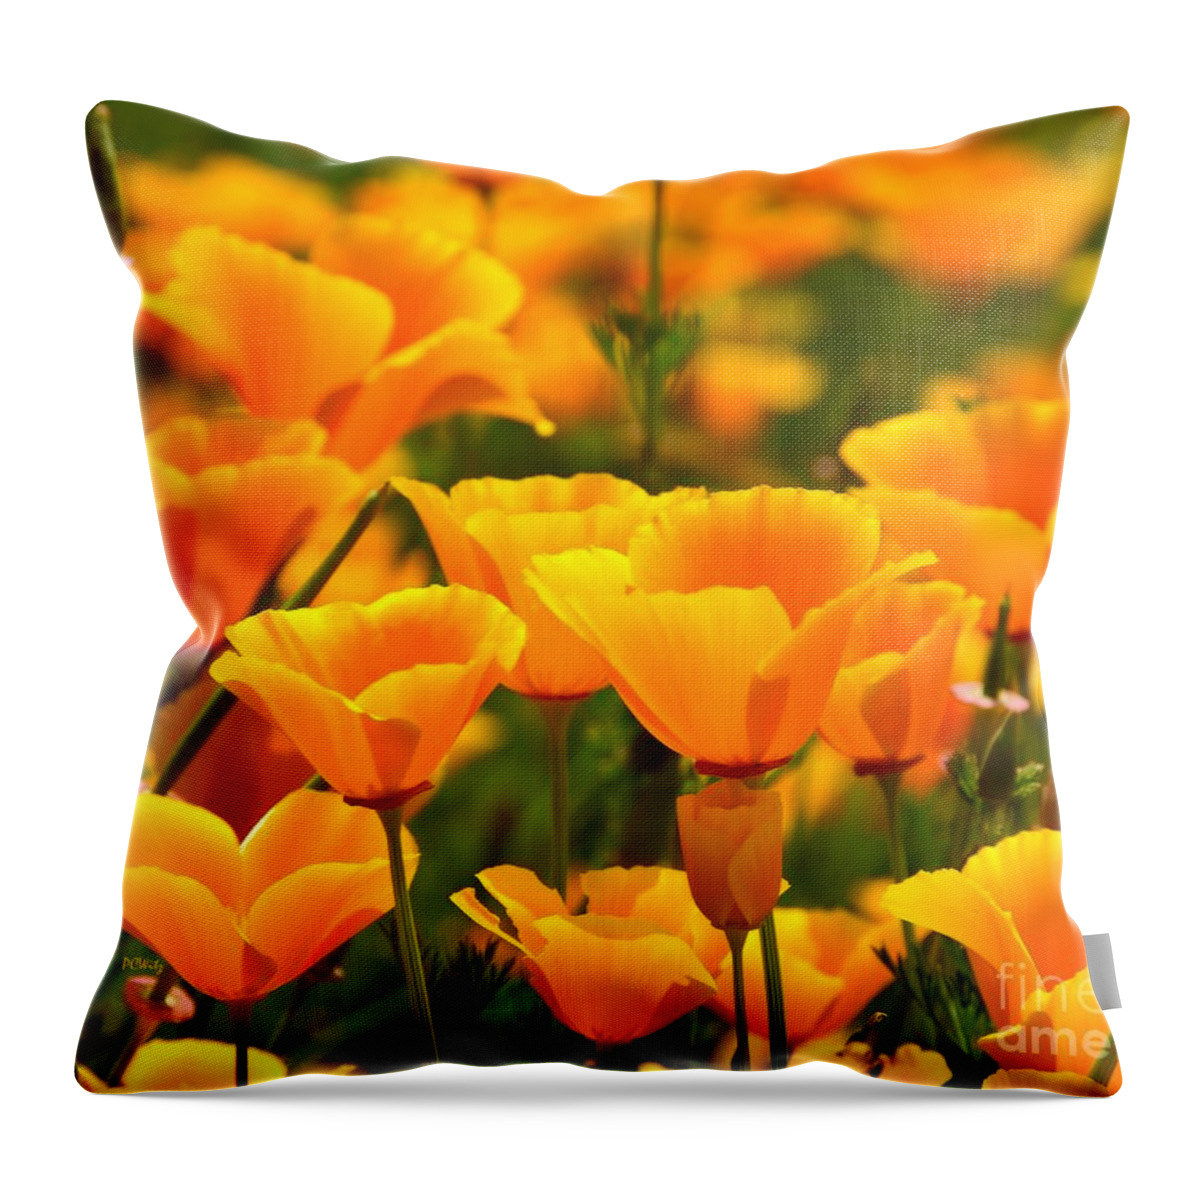 California Poppies Throw Pillow featuring the photograph California Poppies #1 by Patrick Witz